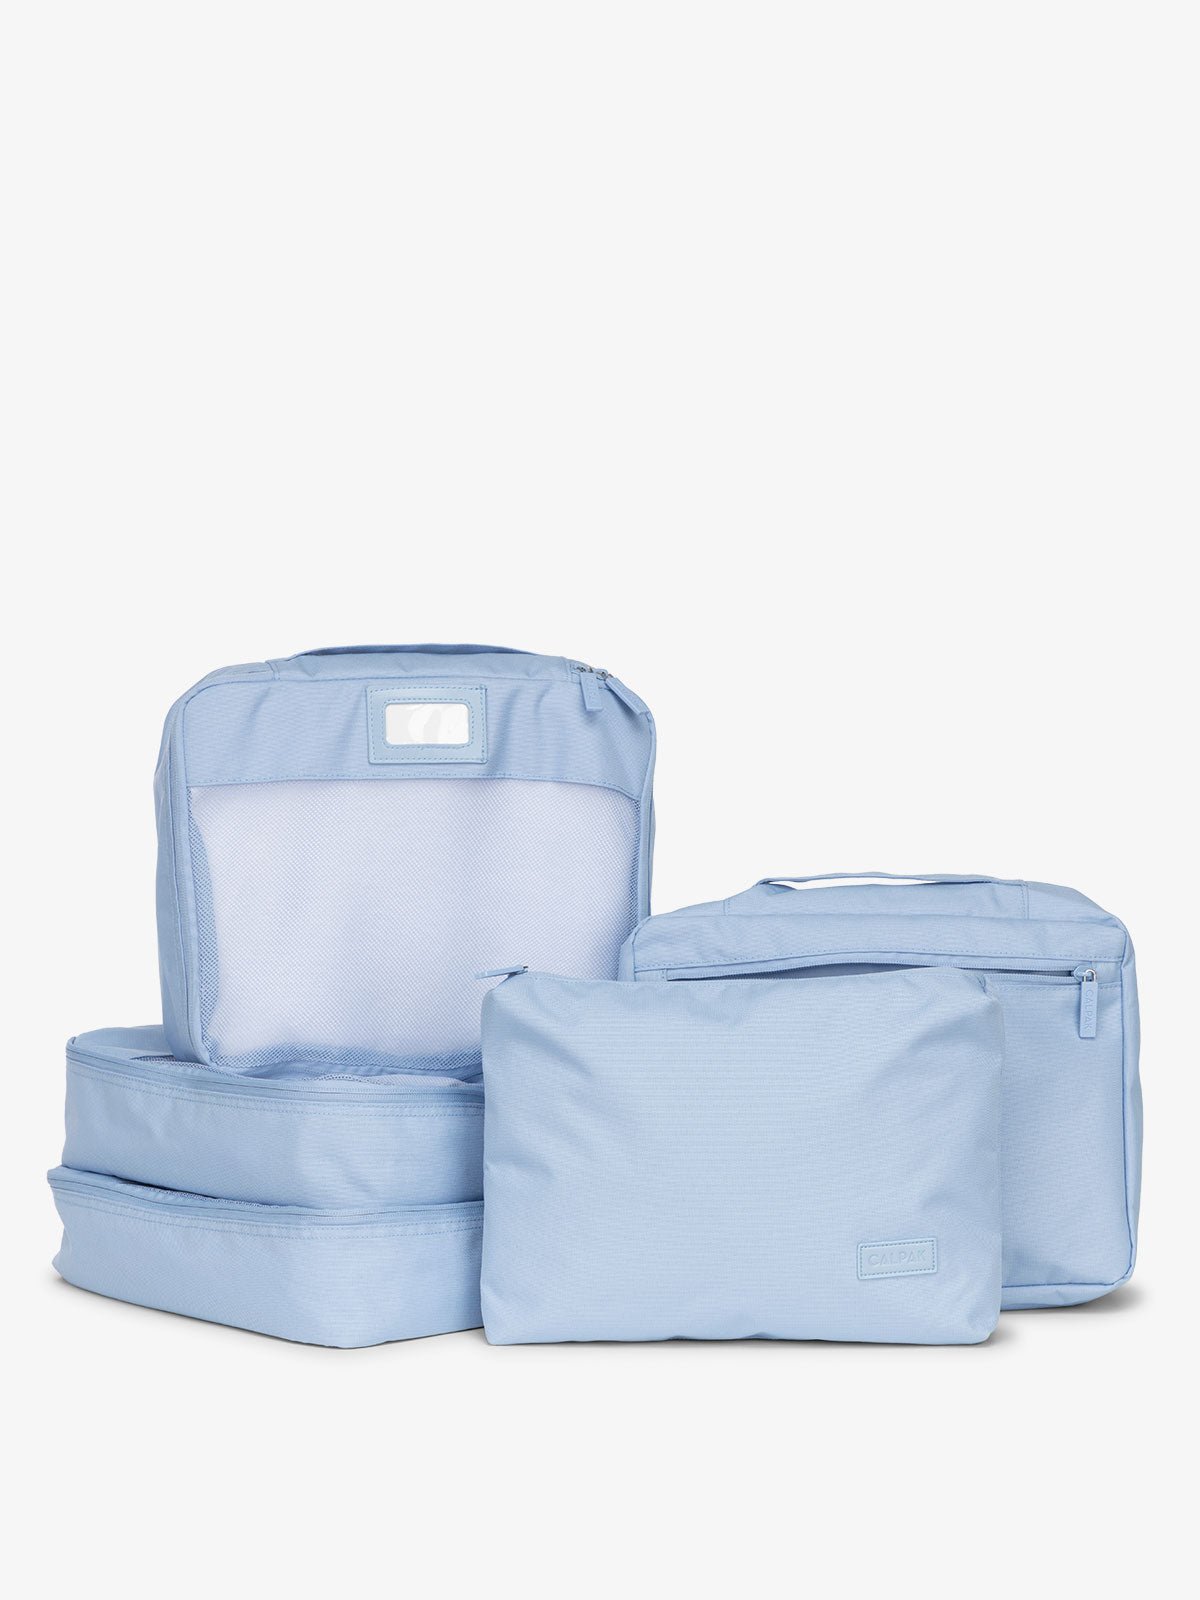 CALPAK 5 piece set packing cubes for travel with labels and top handles in sky